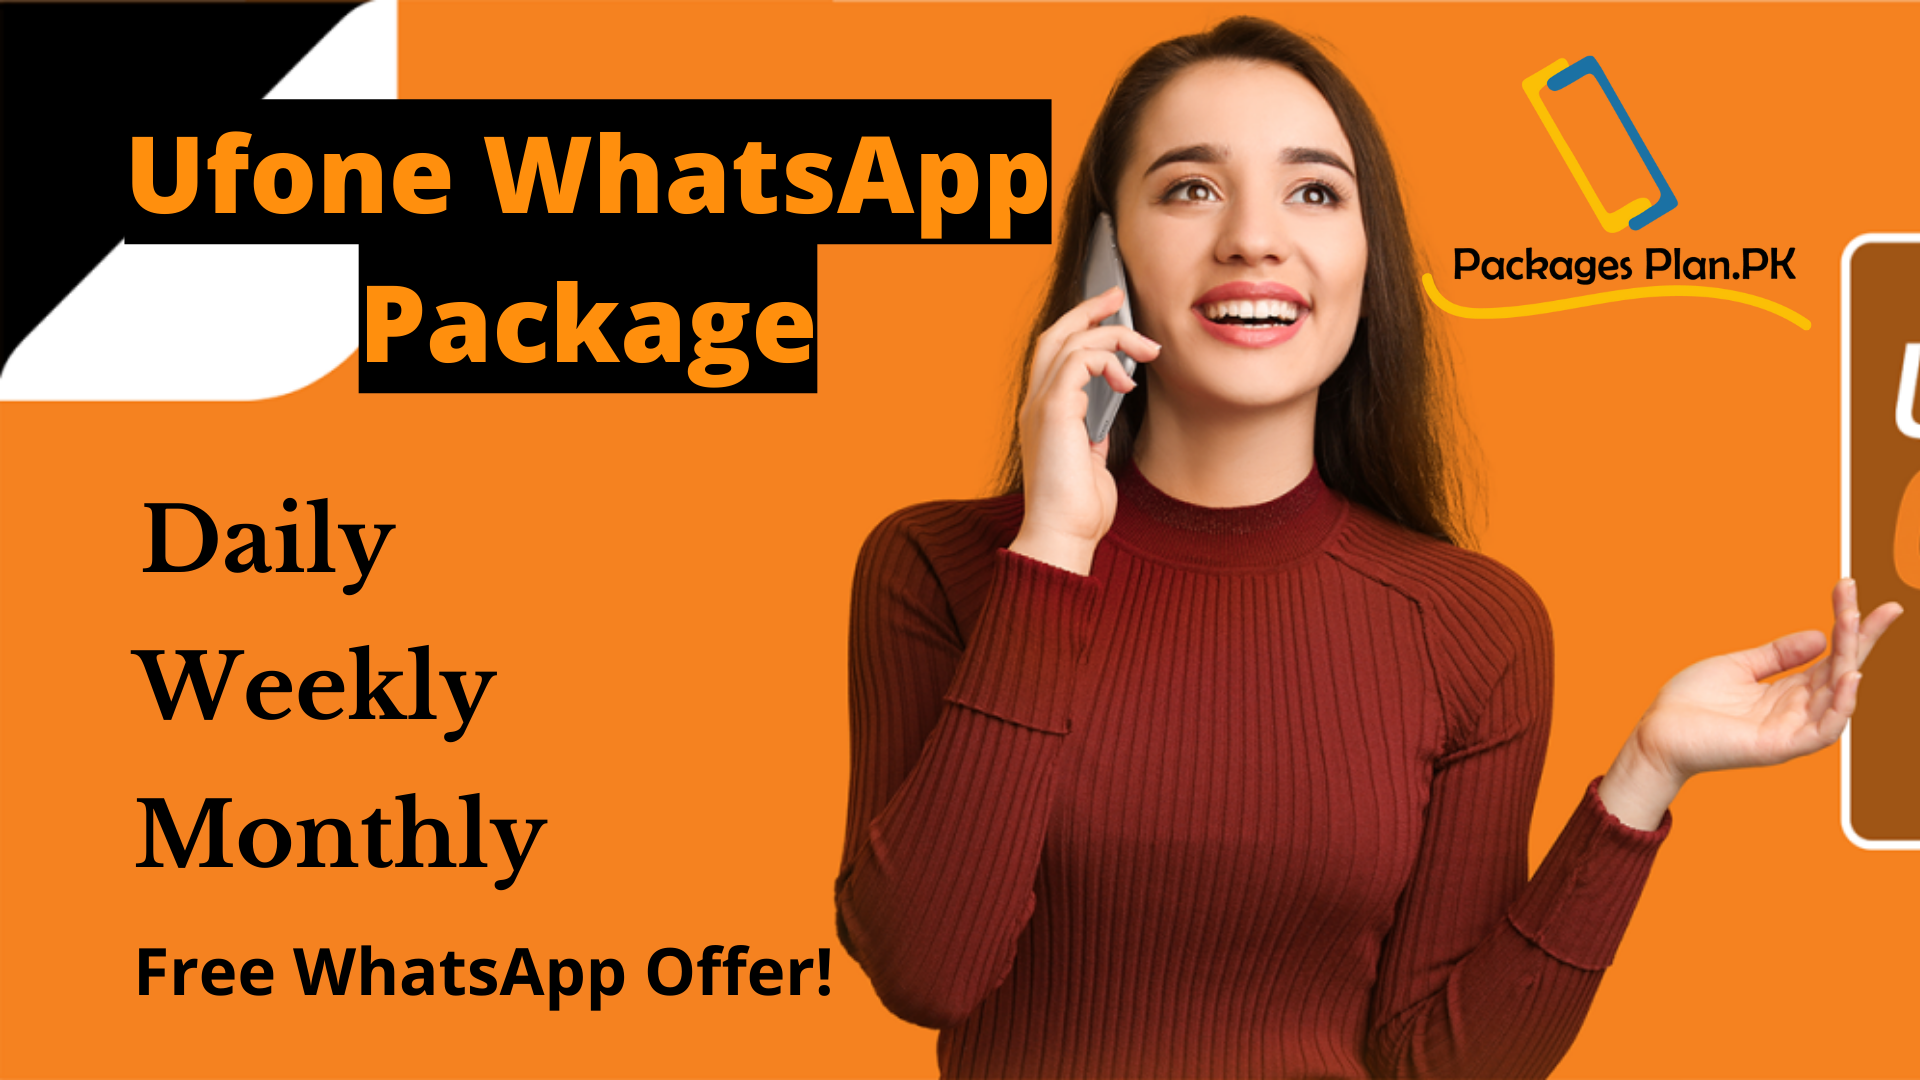 Best Ufone WhatsApp Package 2022: Unlimited Daily & Monthly Bundles